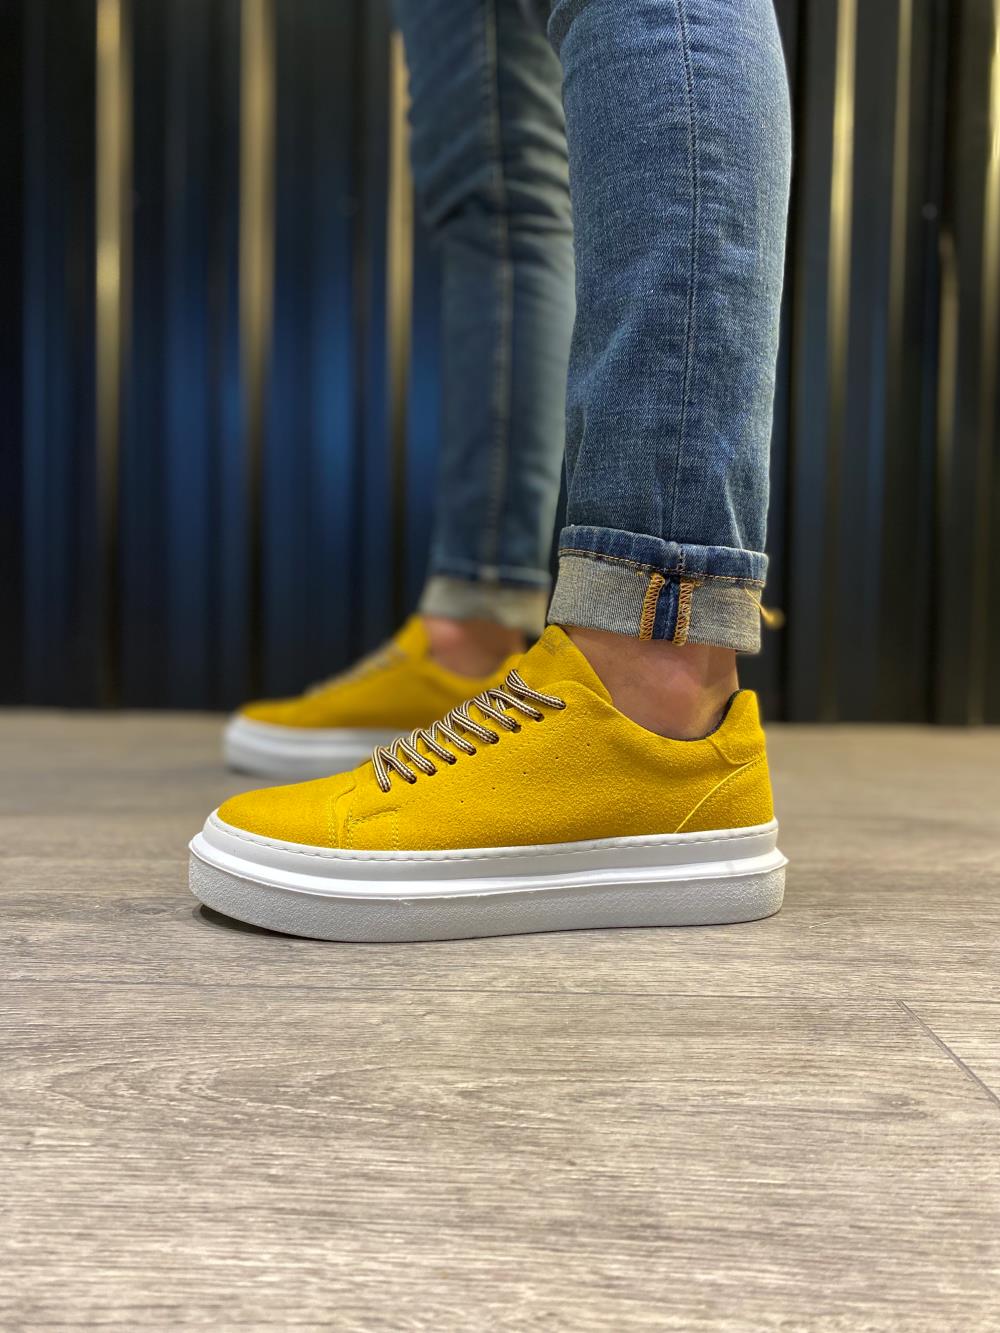 STM Men's Casual Sneakers Shoes 421 Yellow - STREETMODE ™